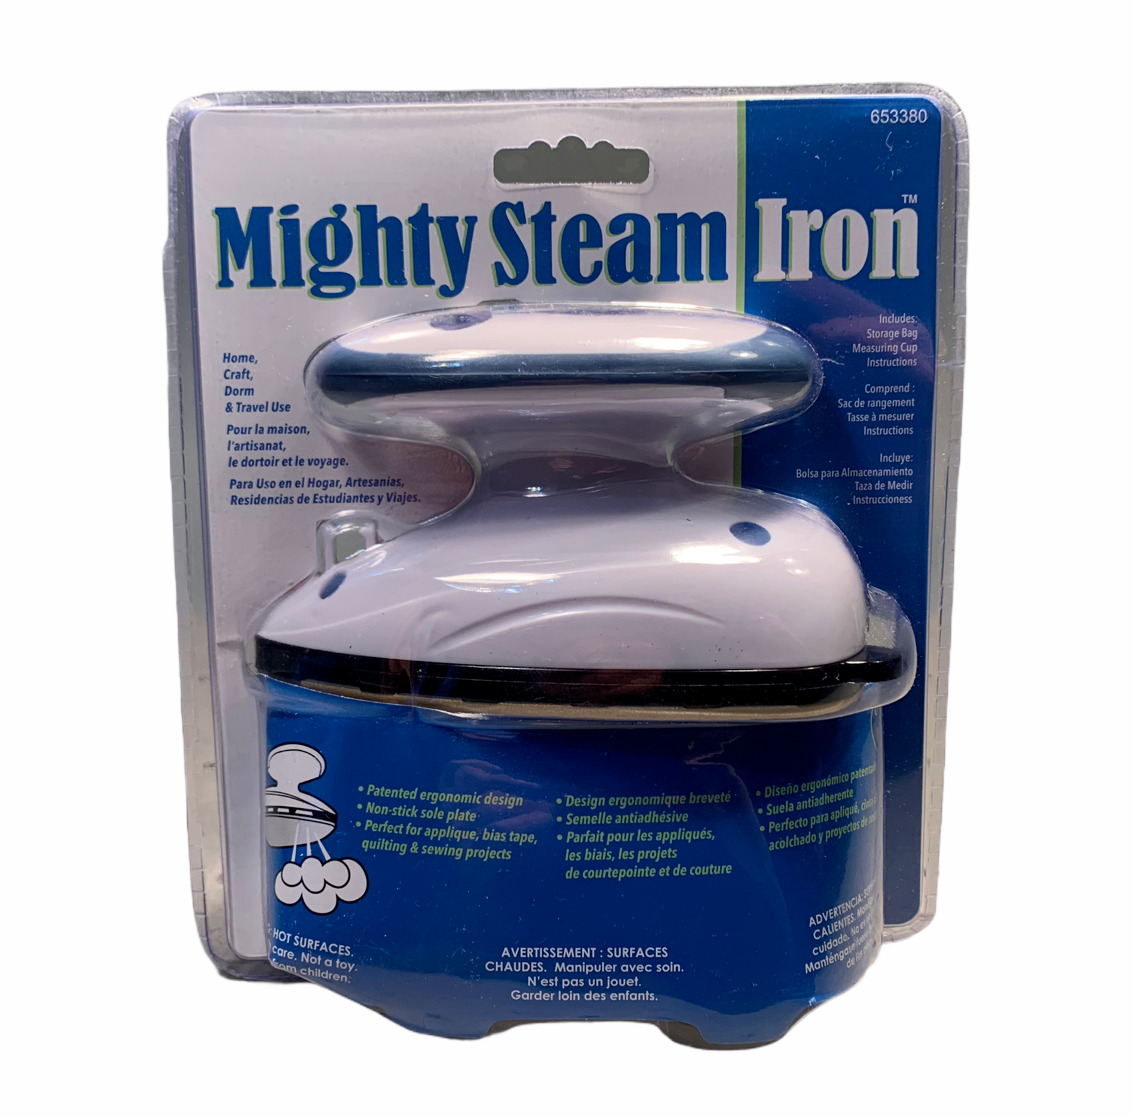 Dritz Mighty Steam Iron 653380 Includes Storage Bag Measuring Cup Instructions